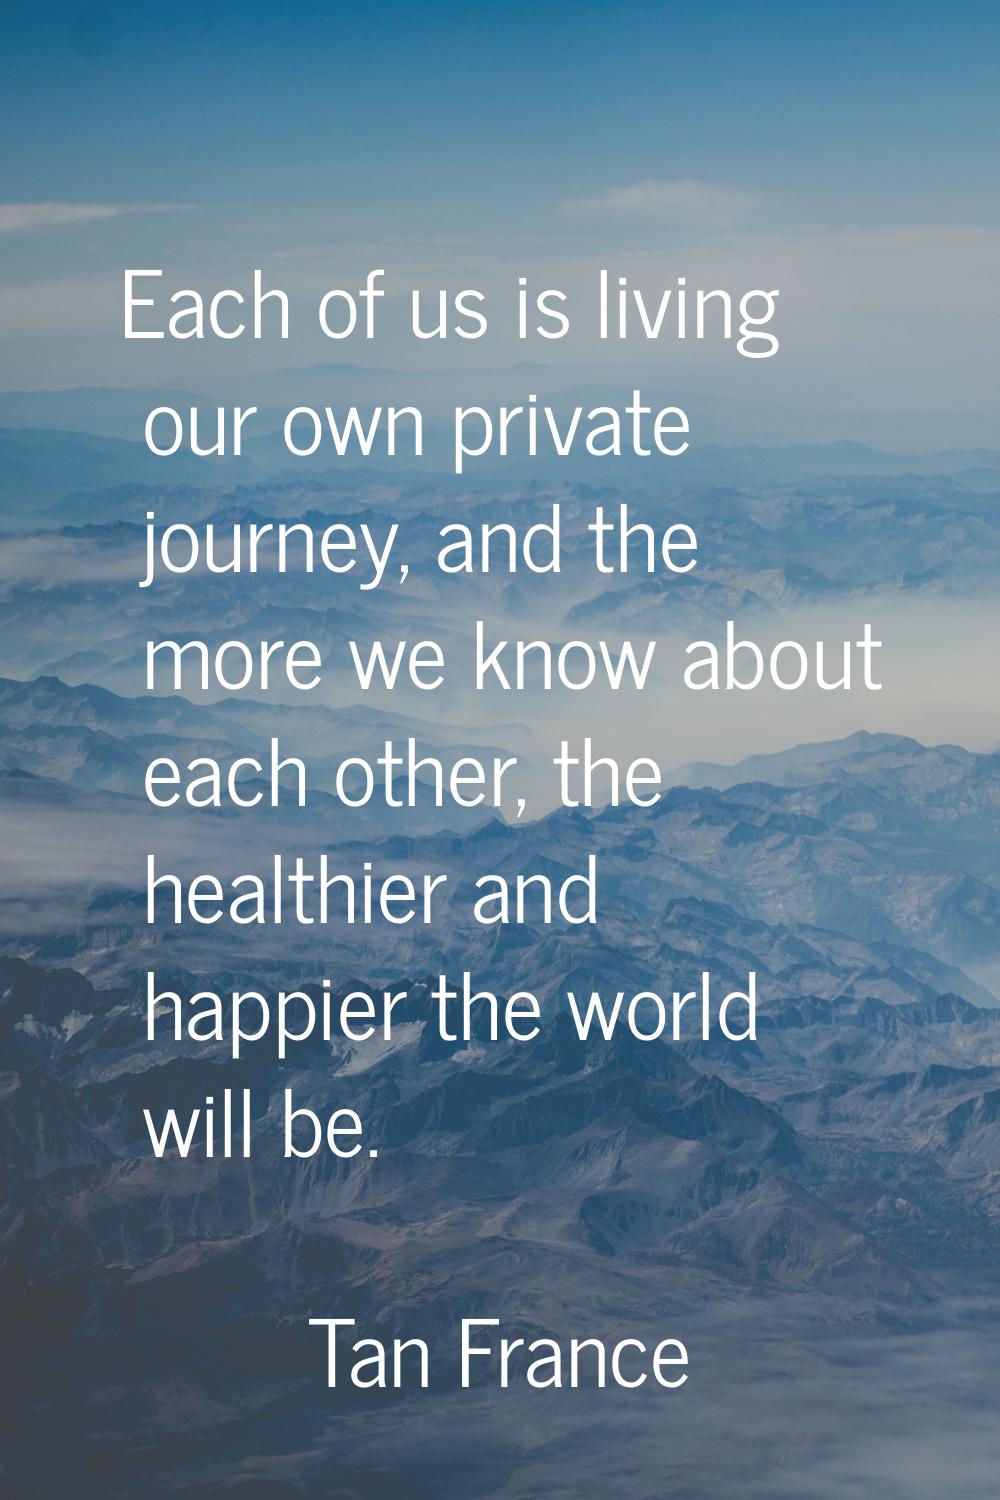 Each of us is living our own private journey, and the more we know about each other, the healthier 